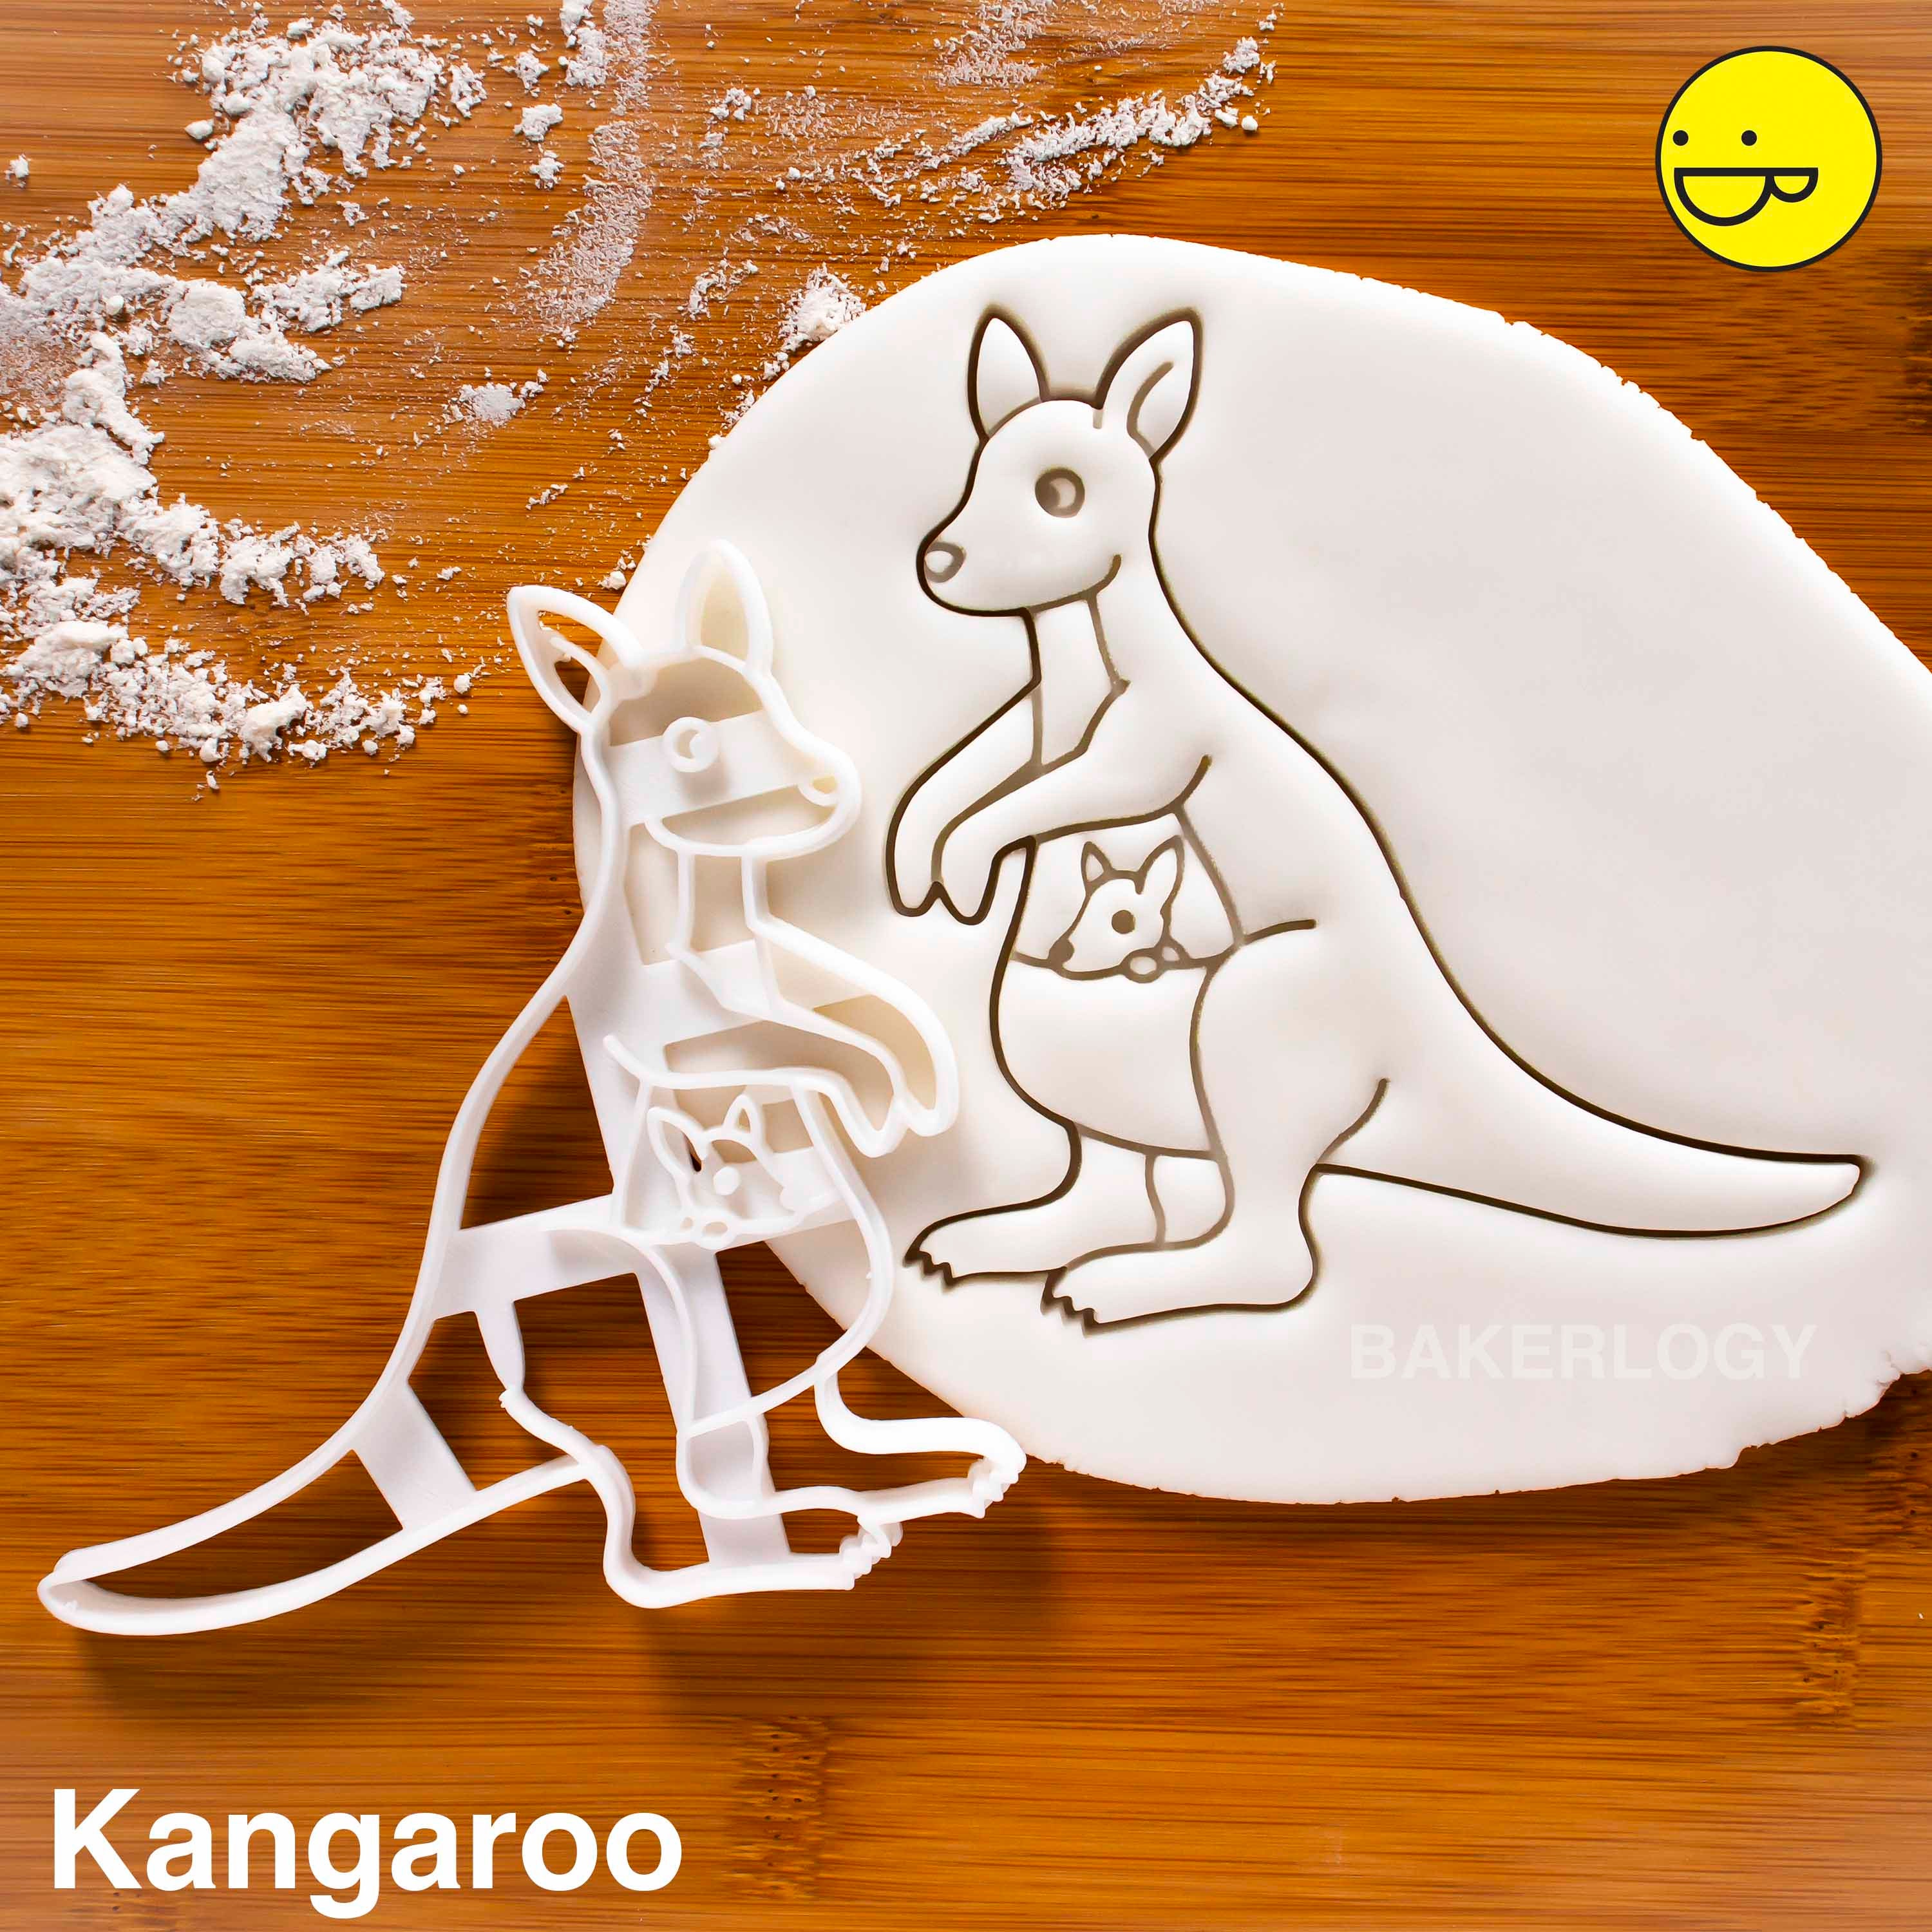 Kangaroo Cookie Cutter Baby Kangaroo in the Pouch Biscuit | Etsy